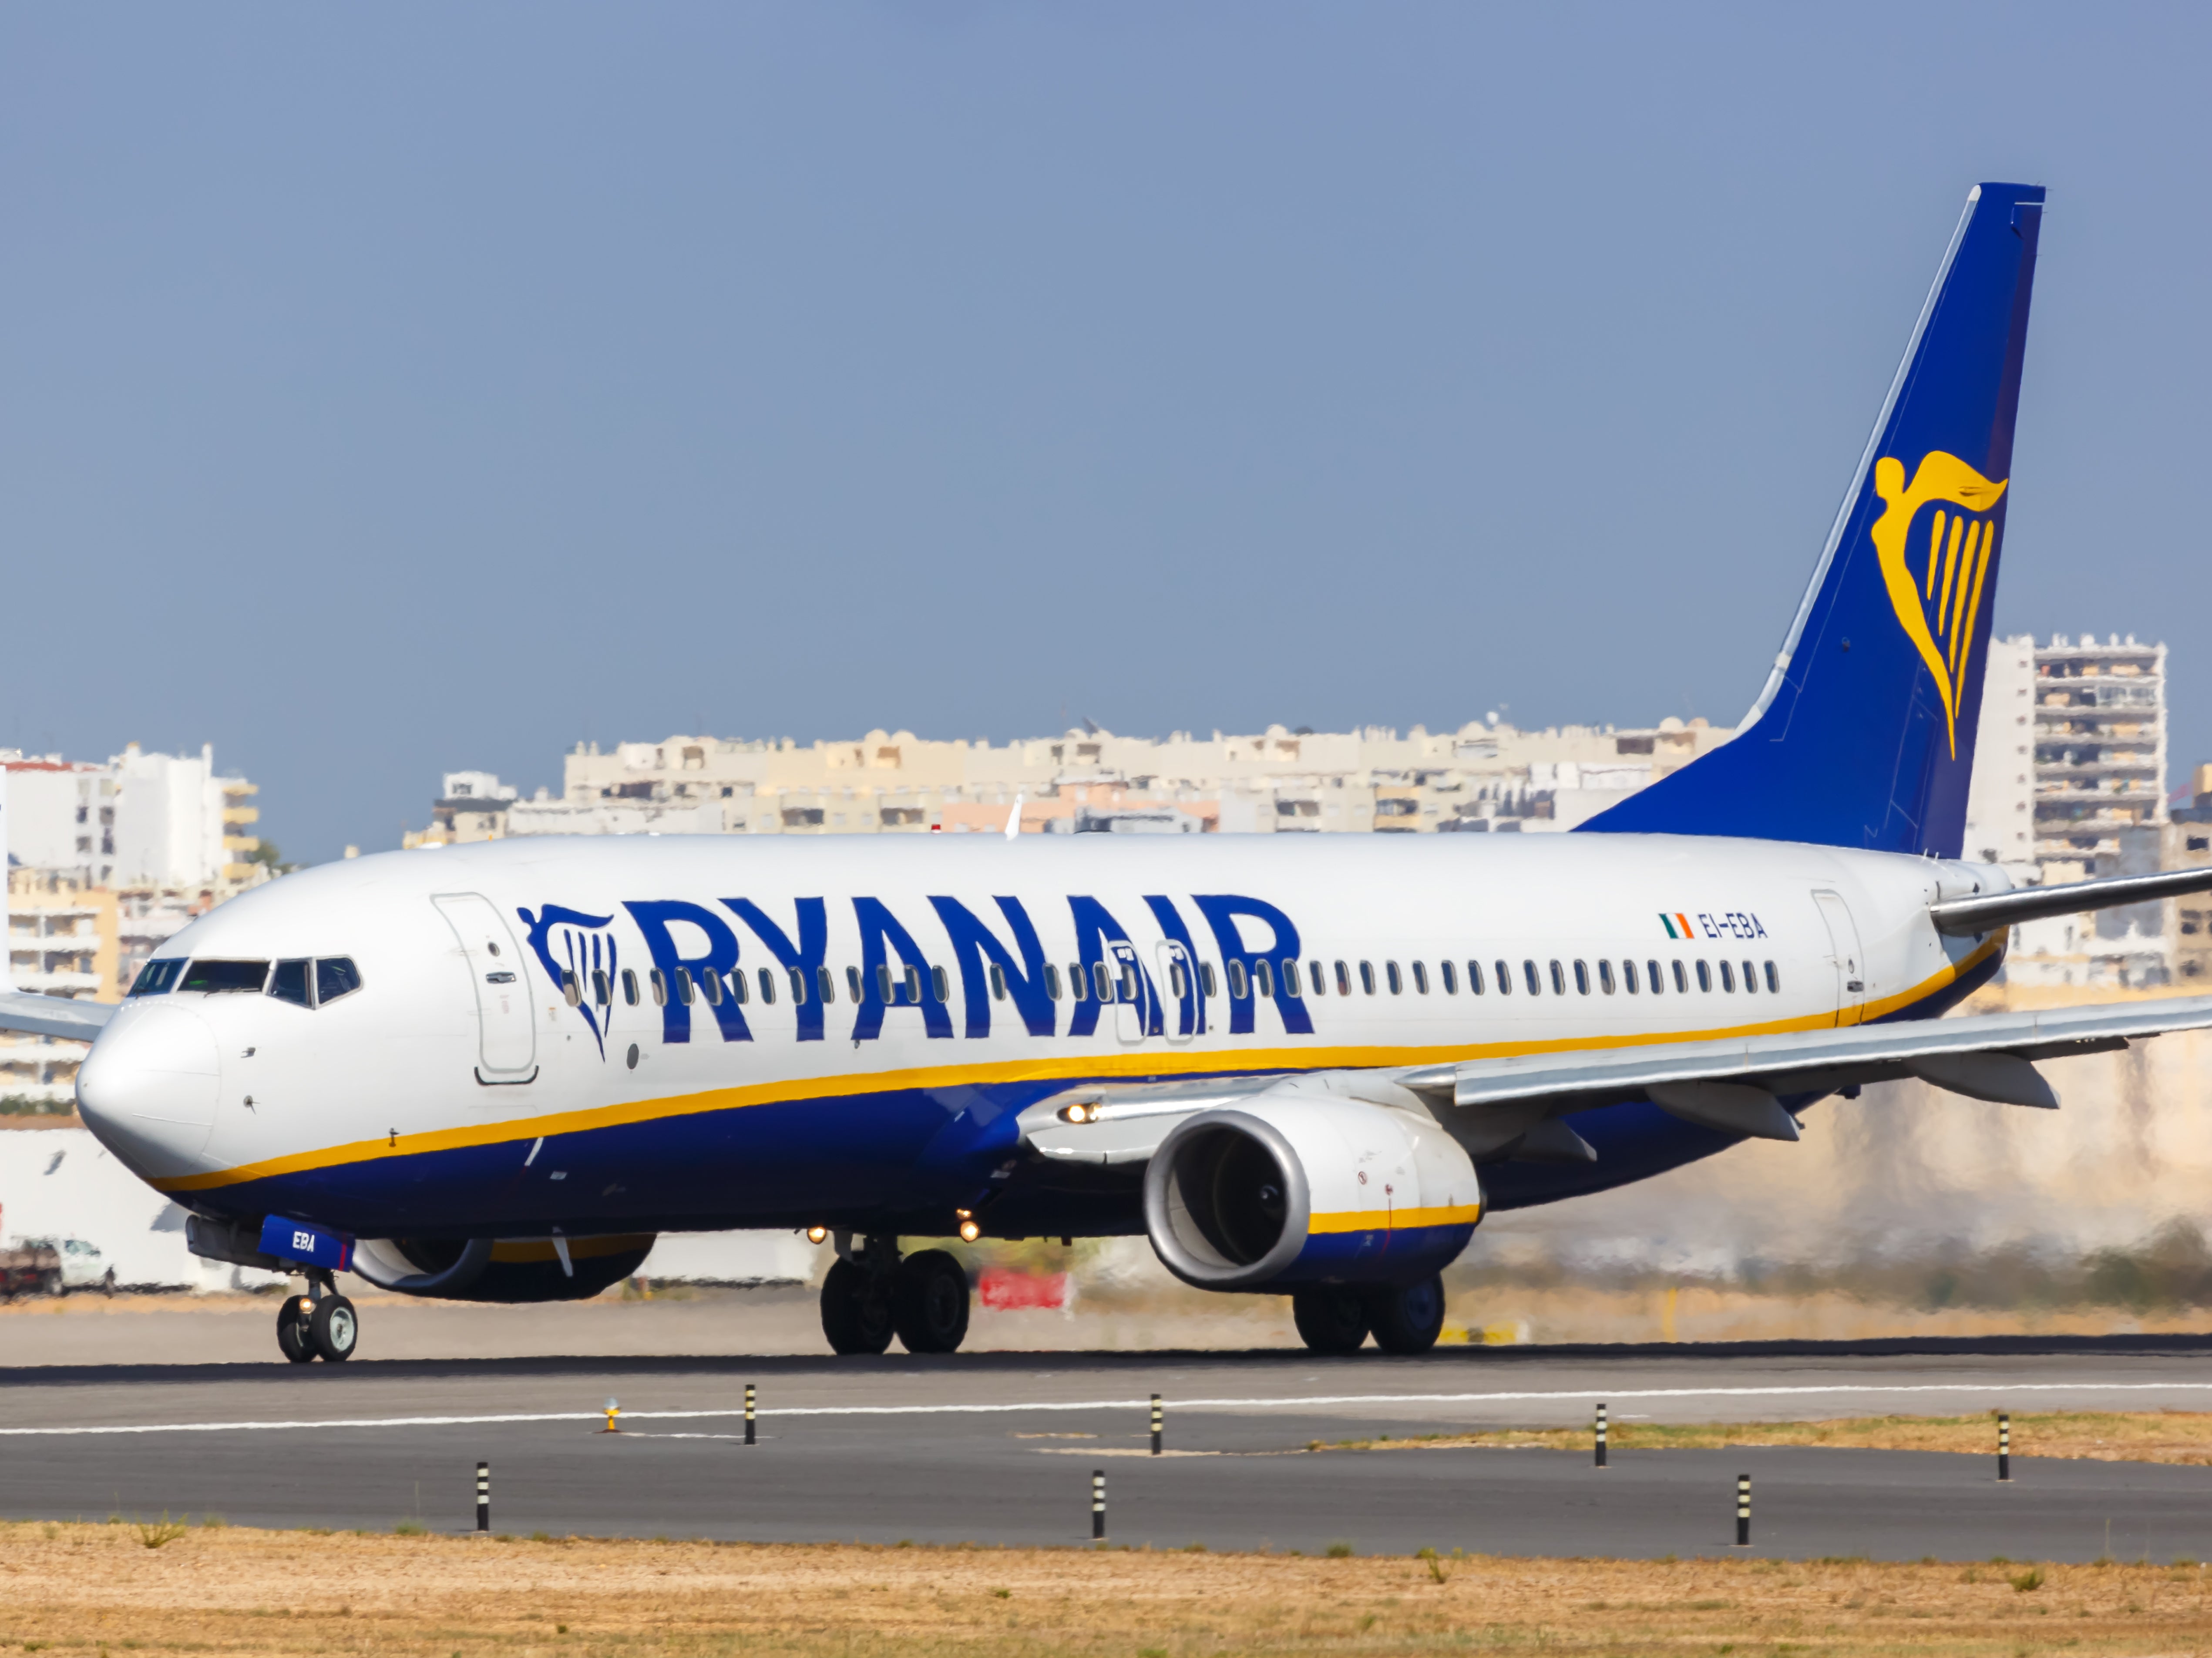 One in eight Ryanair flights were grounded on Tuesday, according to the airline’s chief executive